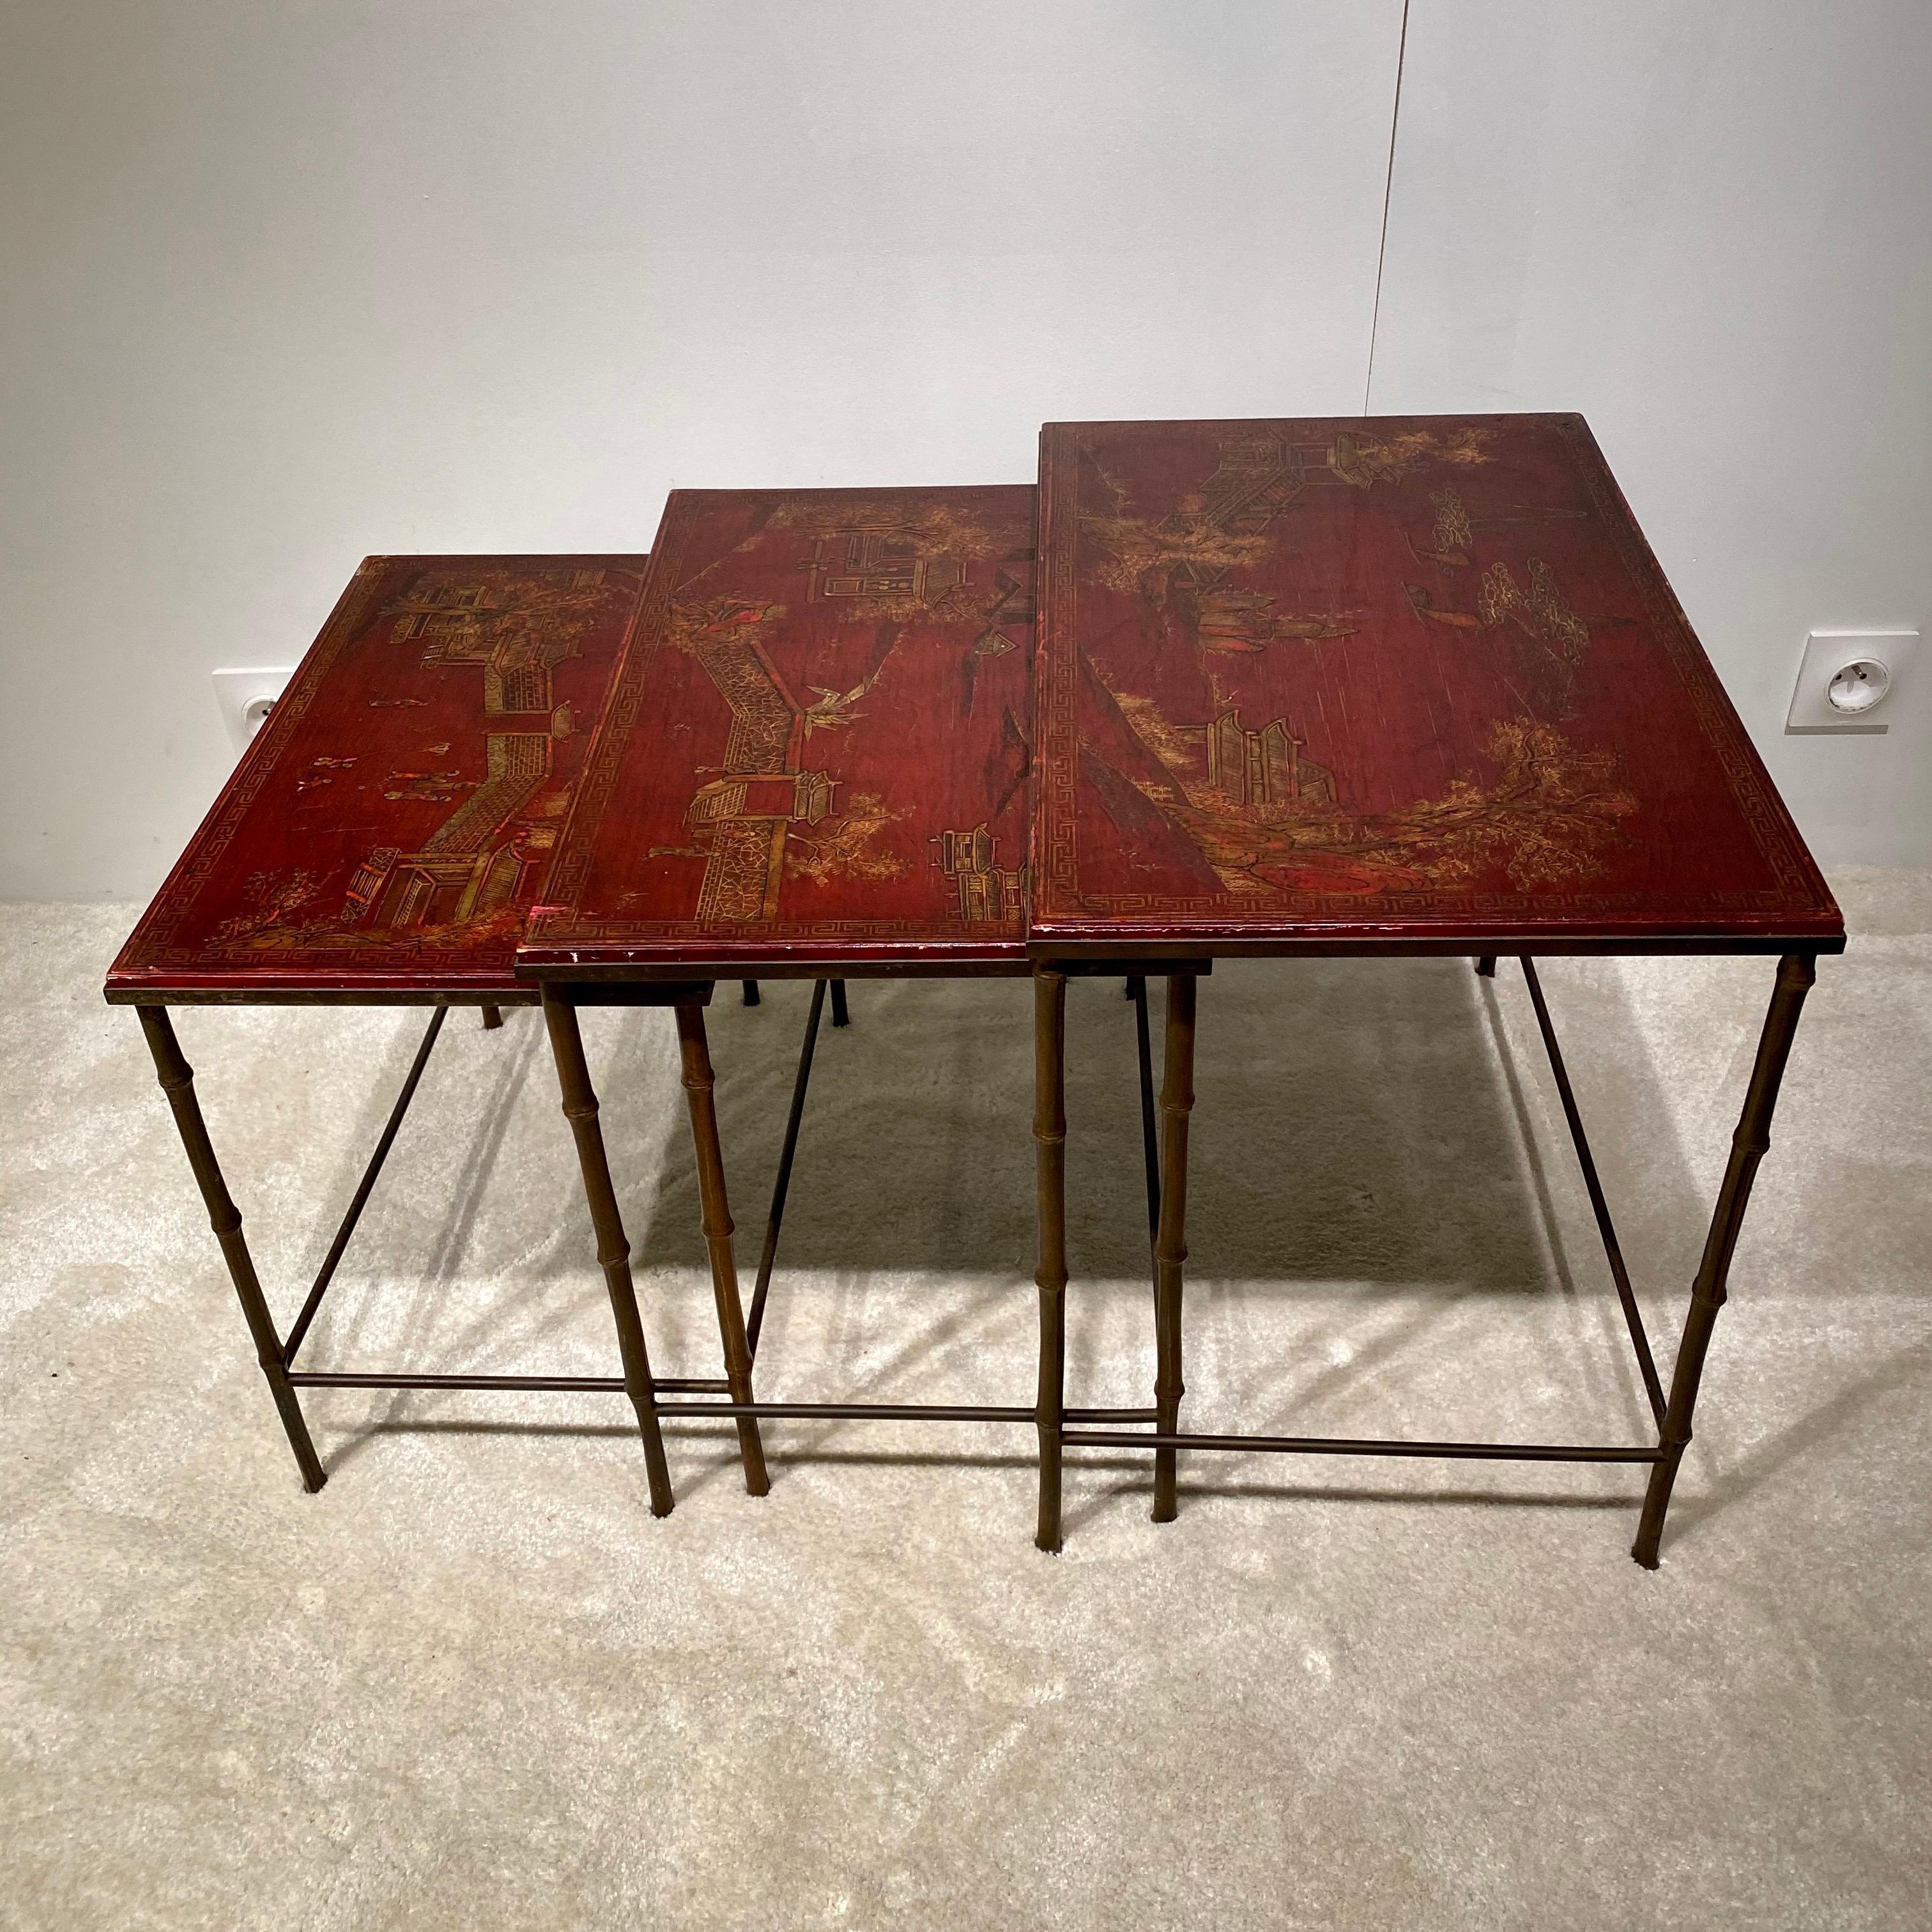 A set of three vintage nesting tables produced by Maison Bagues recognisable by the faux bamboo feet in brass.
A rich burgundy colour lacquered table tops with delicate gold Chinese style designs.
Elegant tables, easy to place to give a French